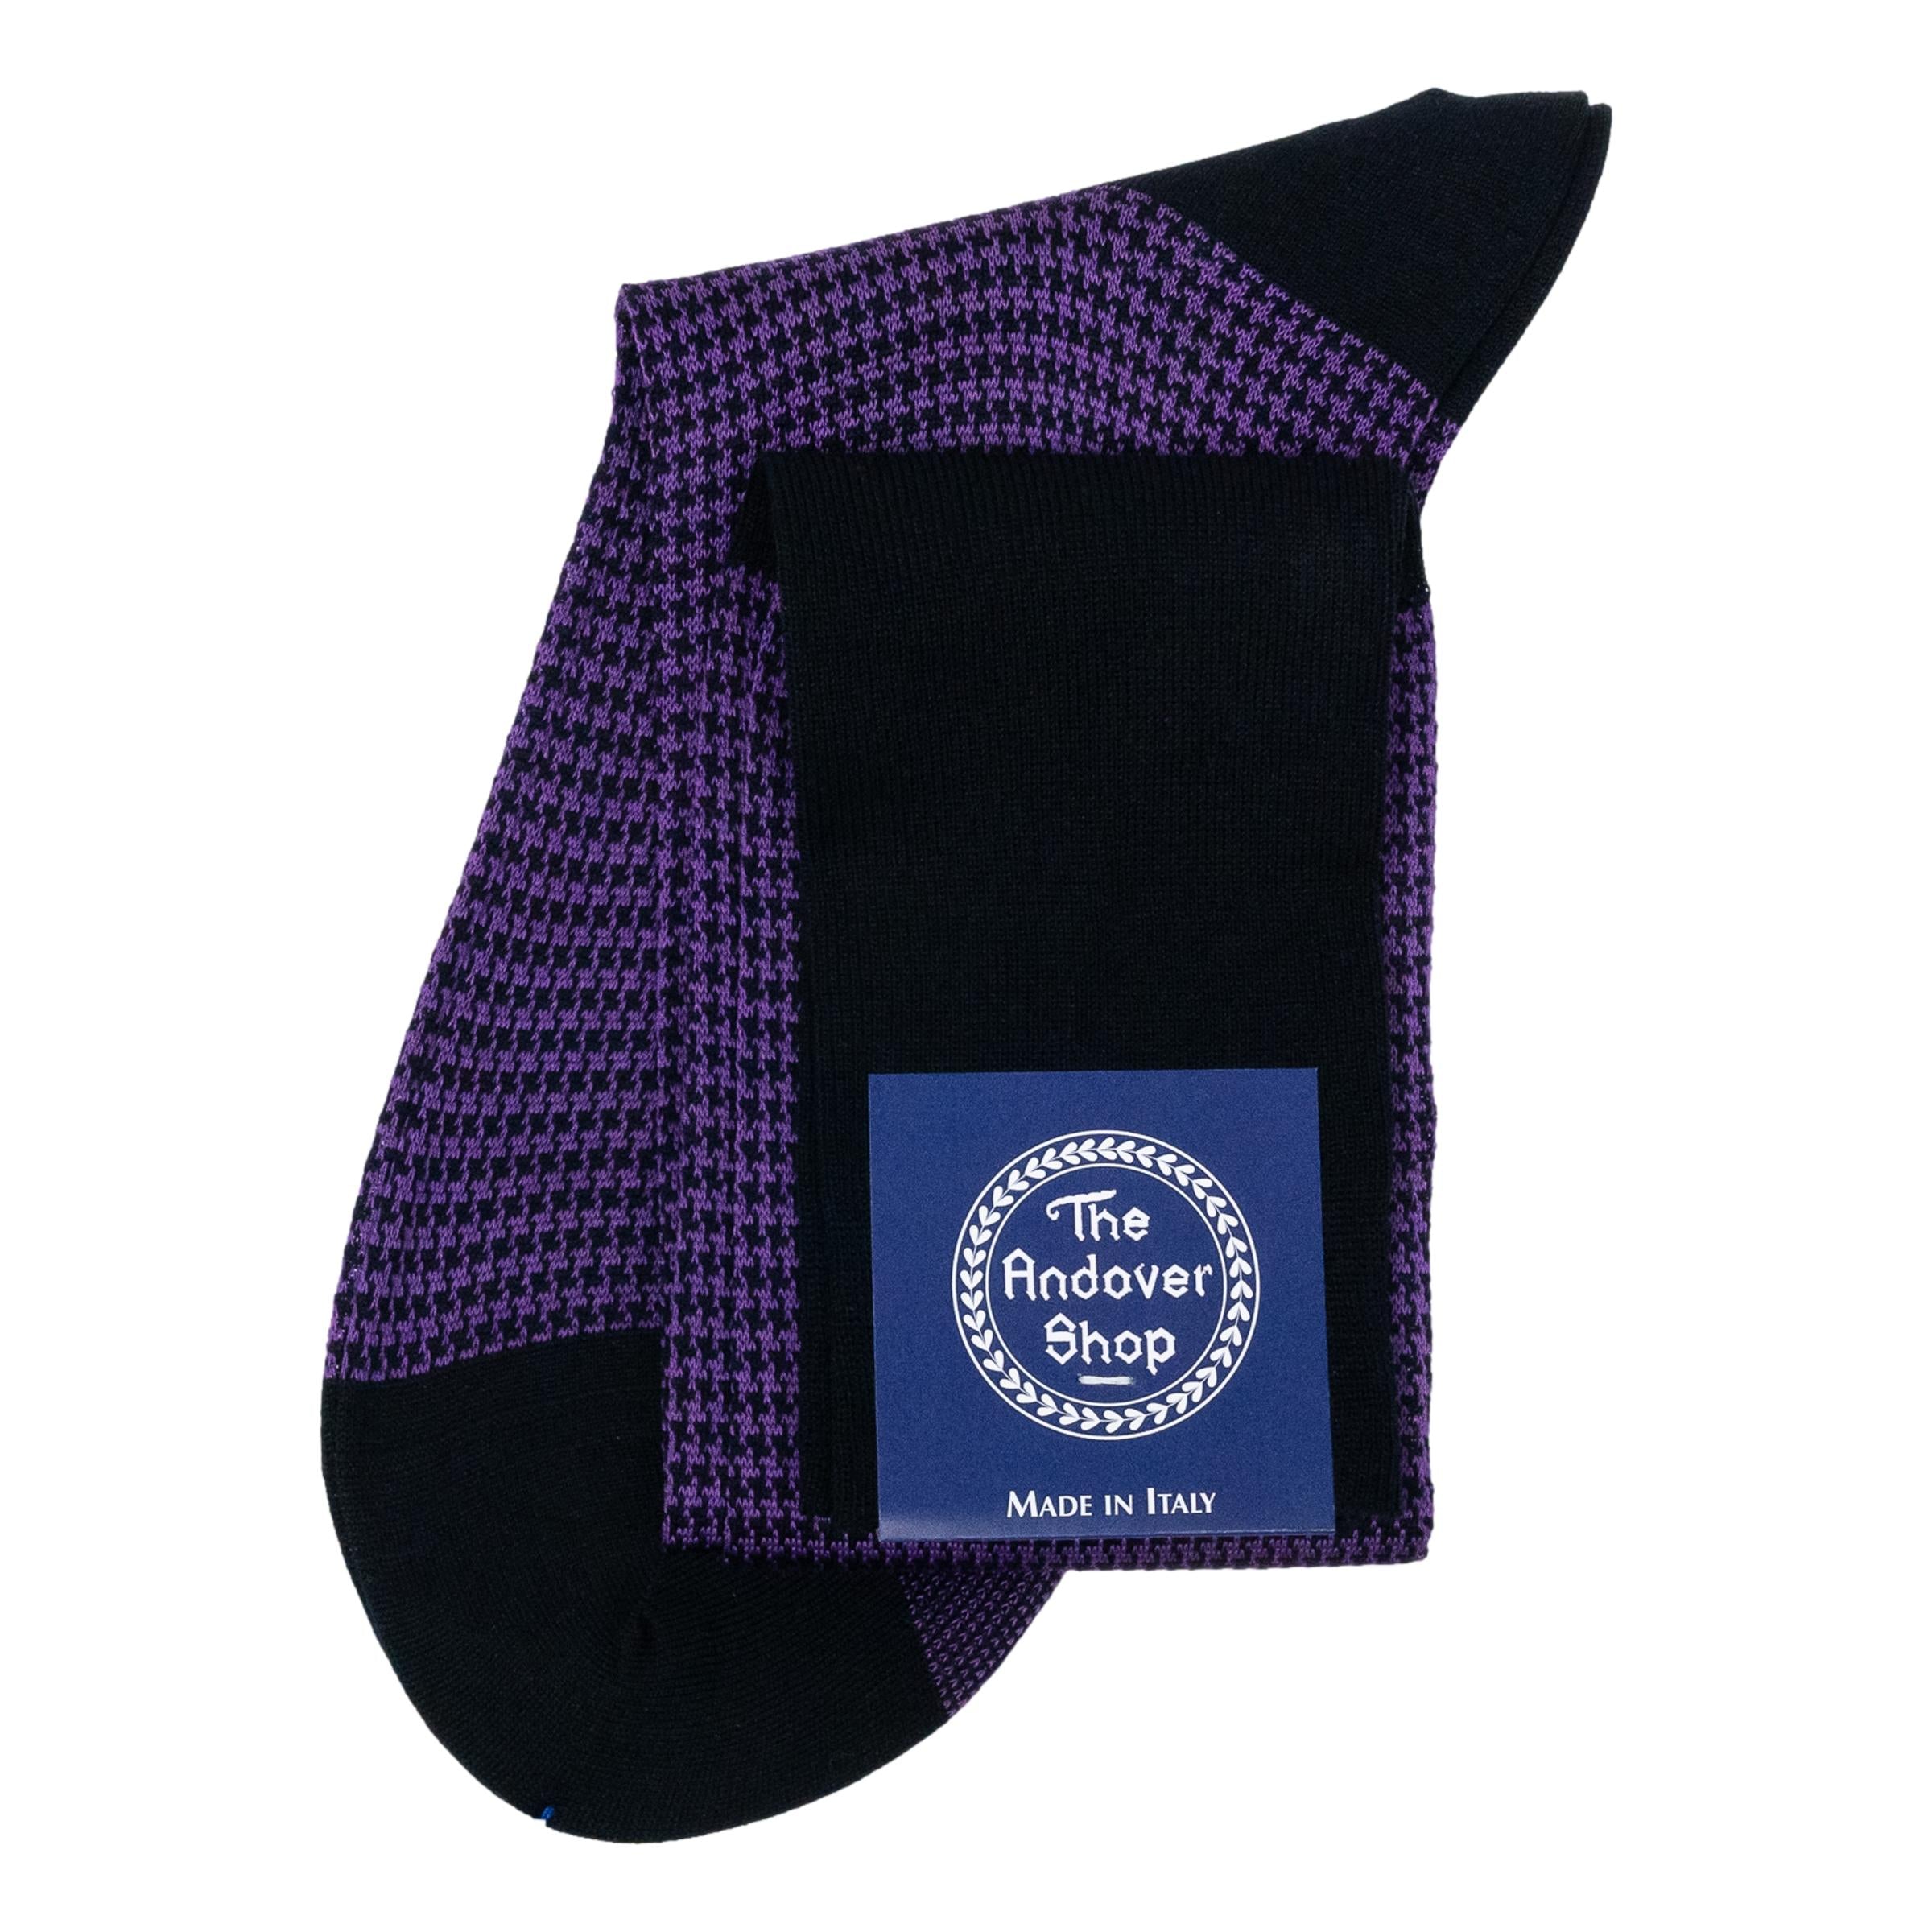 Over-the-Calf Cotton Houndstooth Dress Sock